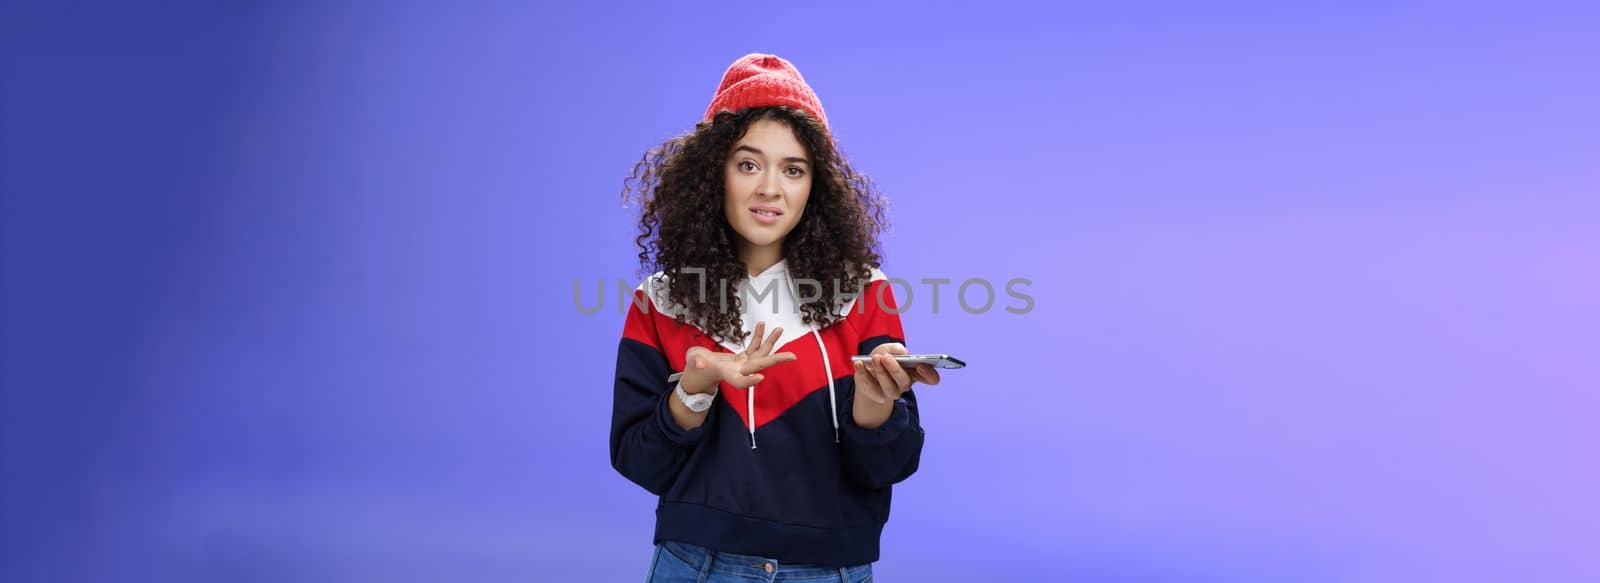 Confused and clueless girl cannot understand meaning of strange message shrugging grimacing questioned as holding smartphone and extending arm in unaware gesture over blue background.